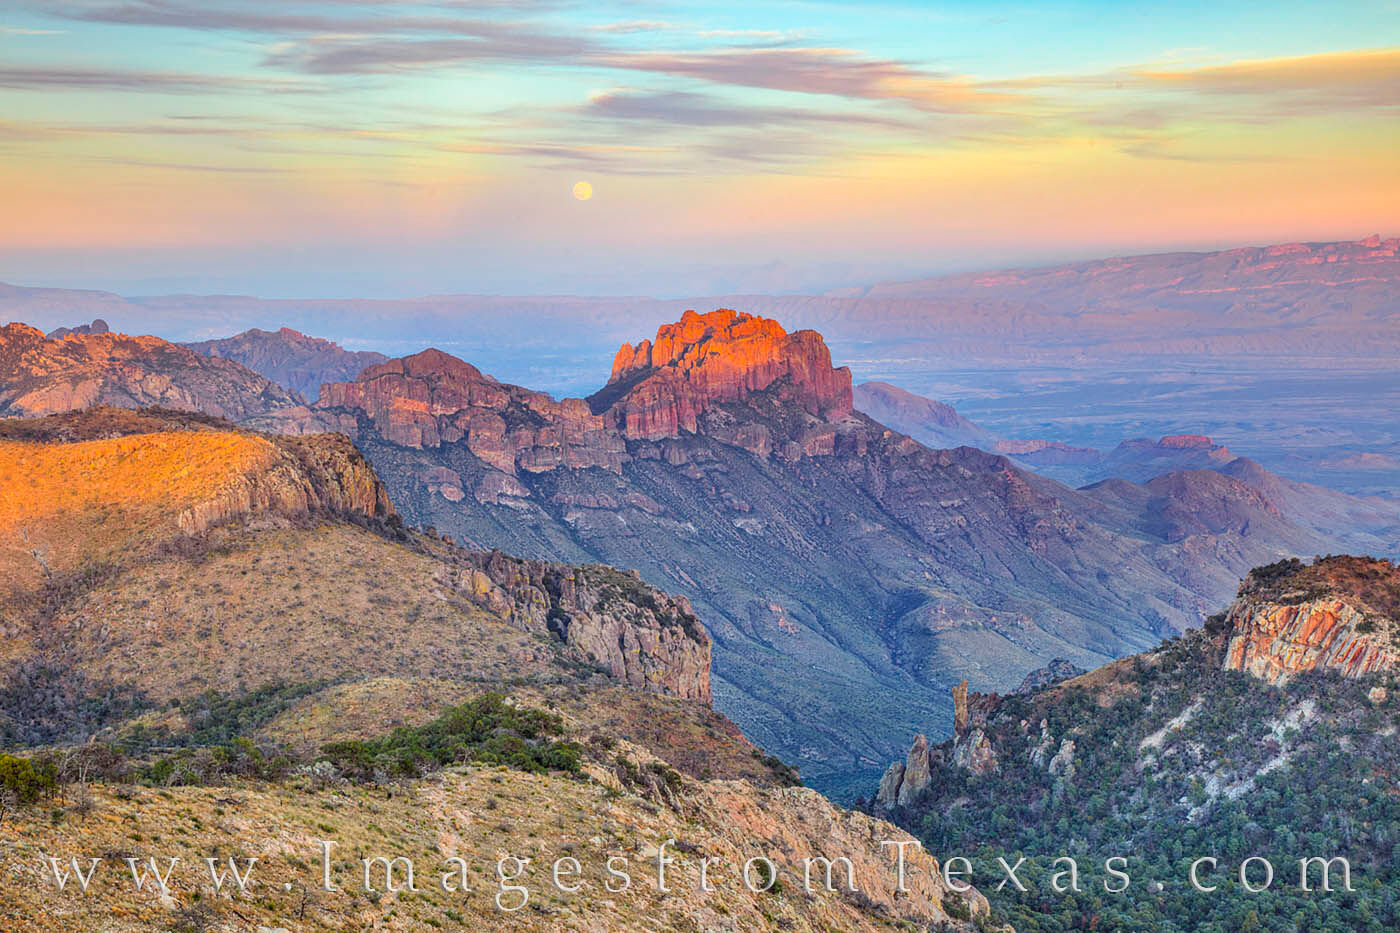 From Emory Peak, the full moon rising in the east is seen hanging over the distant mountains in Big Bend National Park. Taken...